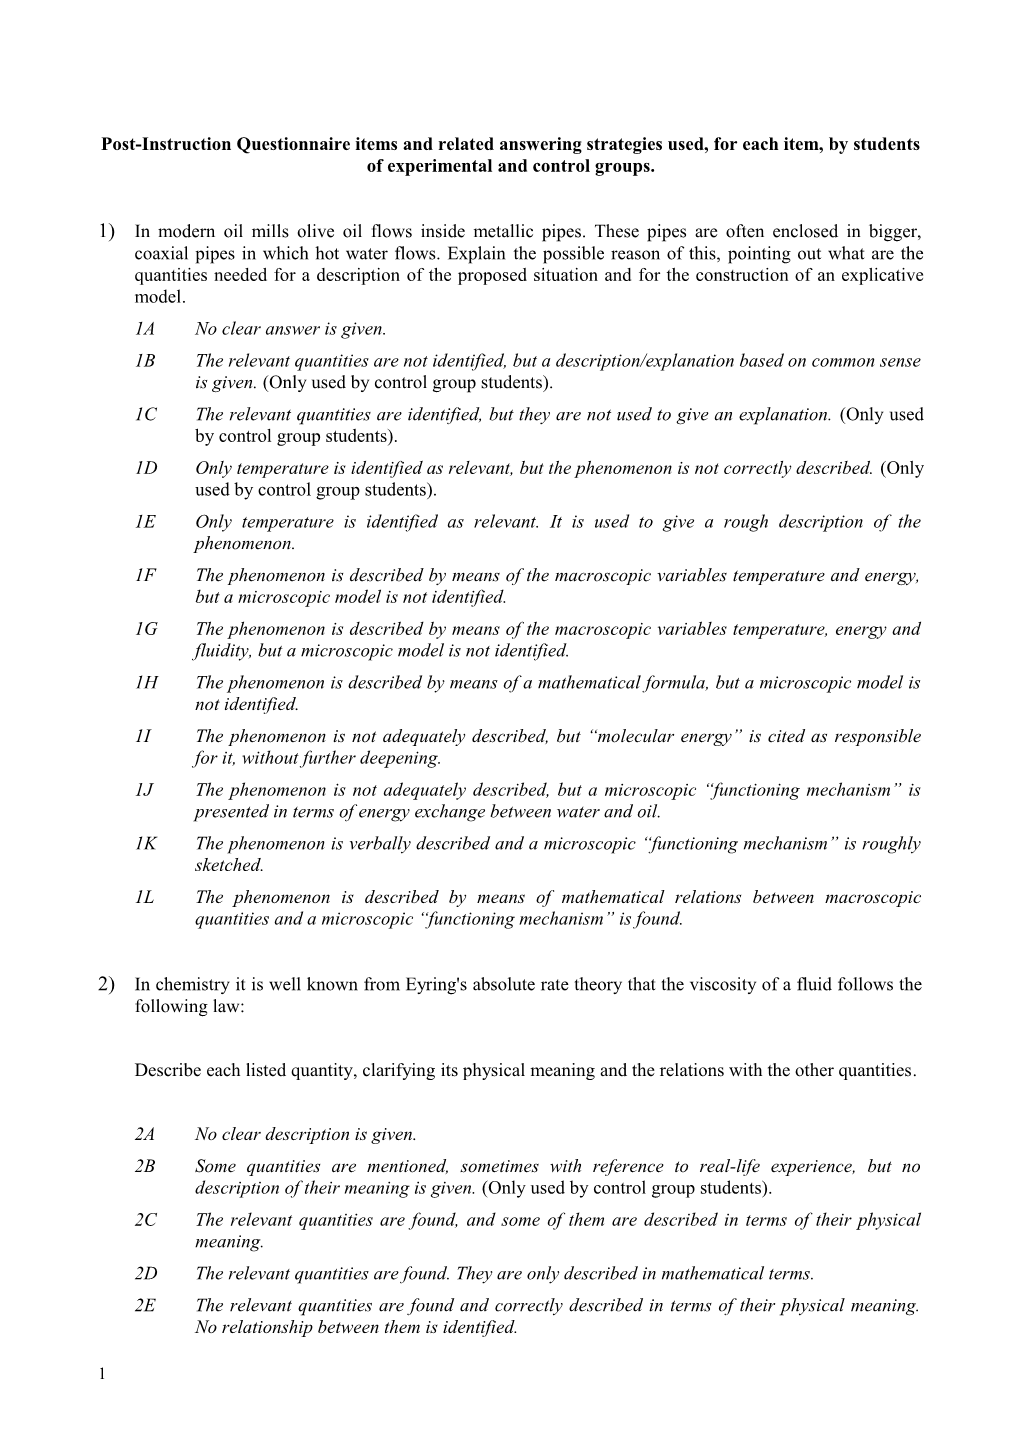 Post-Instruction Questionnaire Items and Related Answering Strategies Used, for Each Item